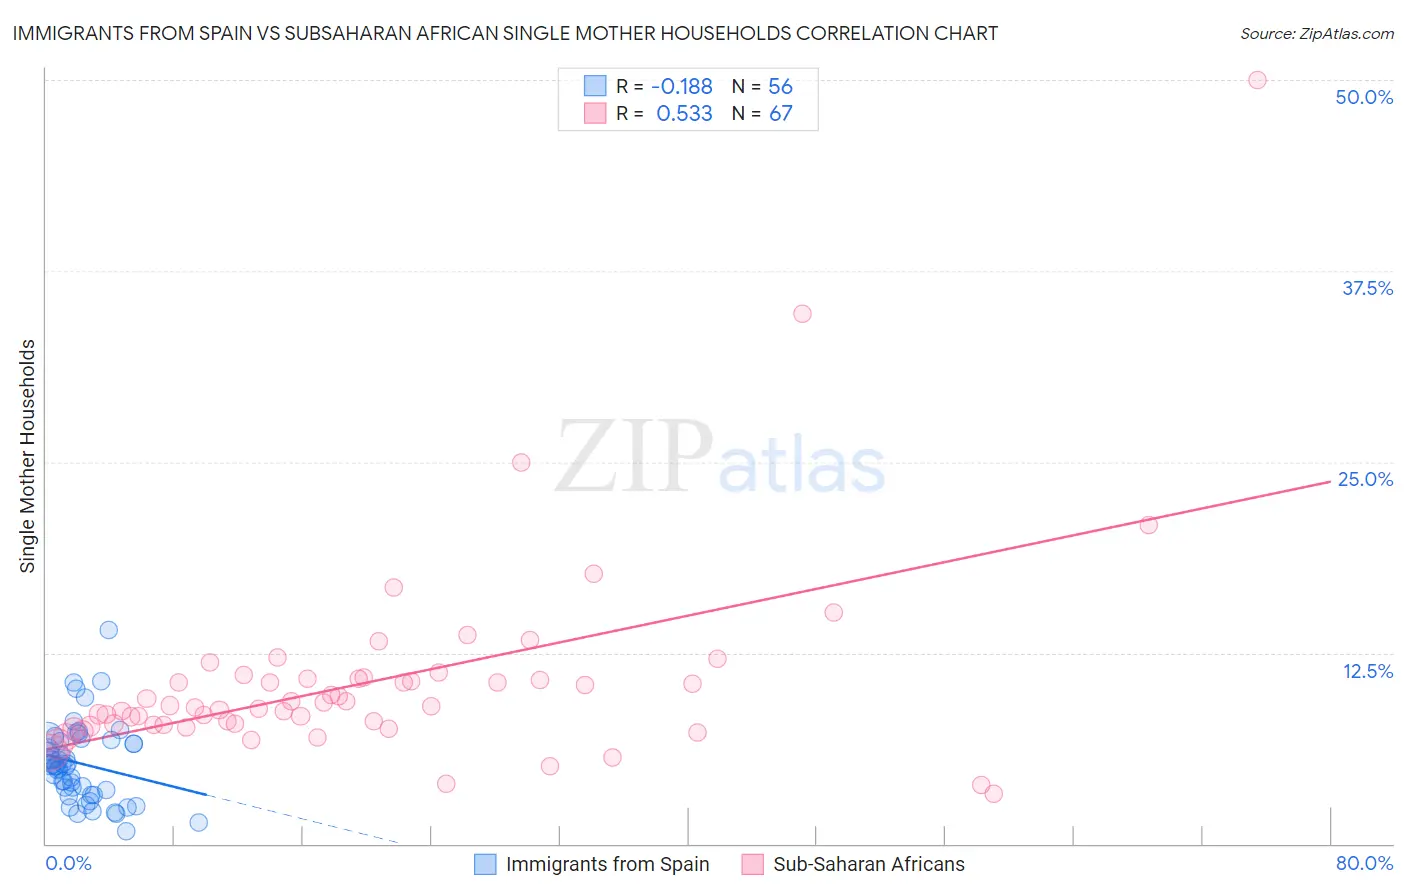 Immigrants from Spain vs Subsaharan African Single Mother Households